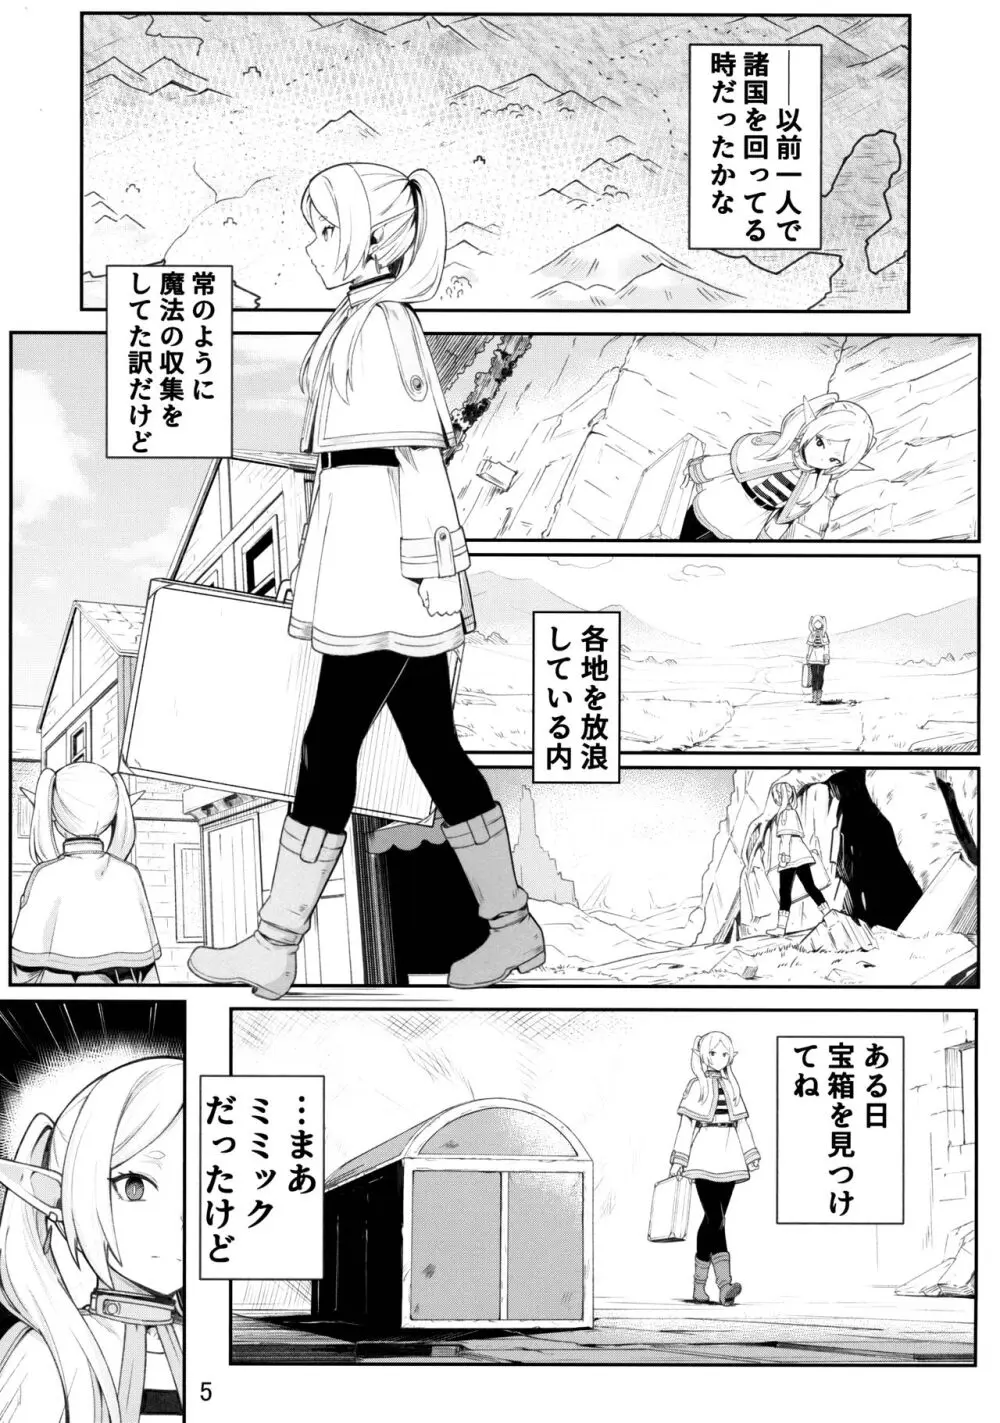 FRIEREN'S ちょっとHな本 - page7